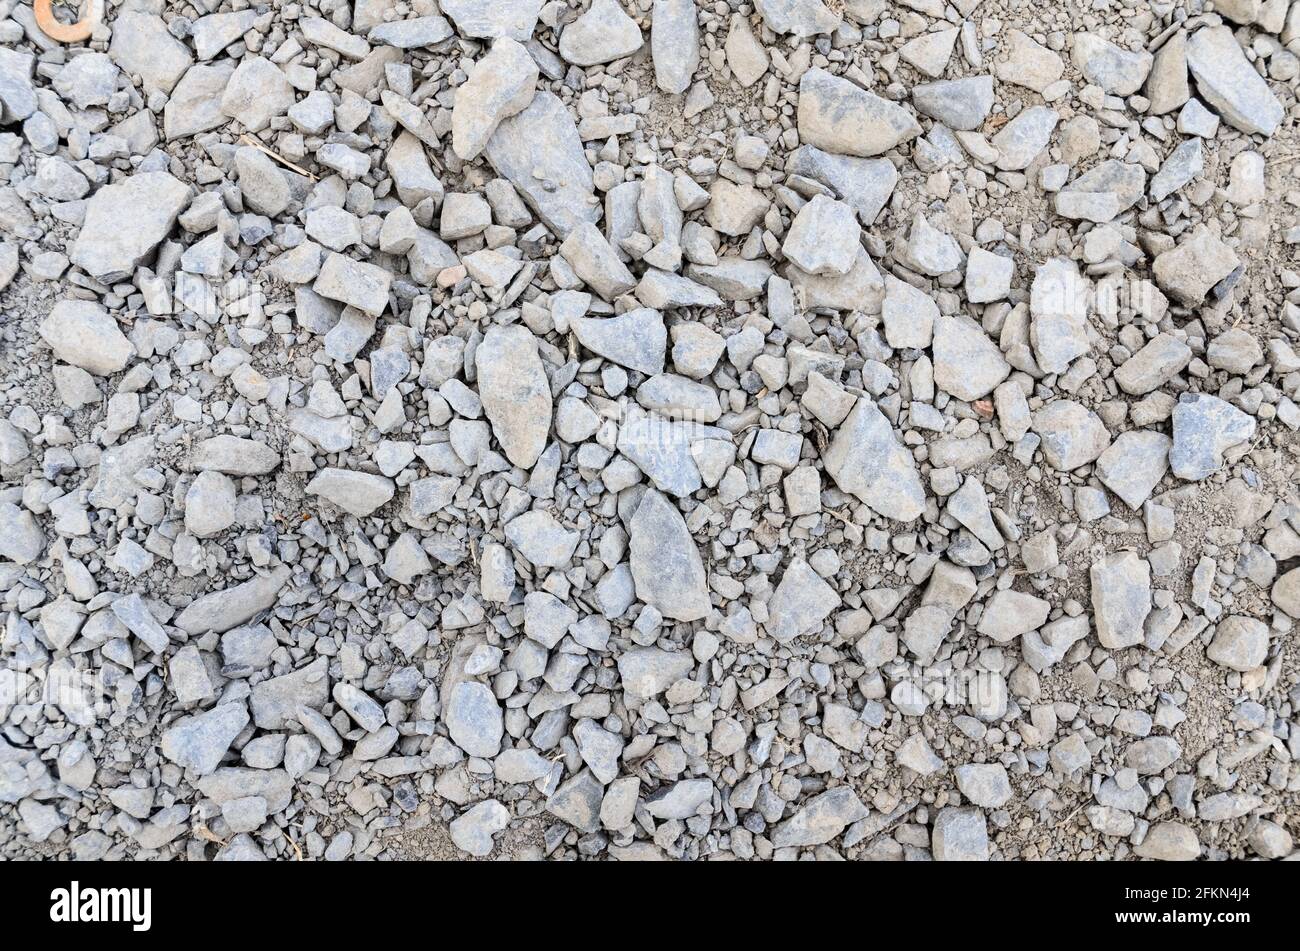 Abstract background with crushed gravel and small little grey rocks and stones, close-up view from directly above Stock Photo